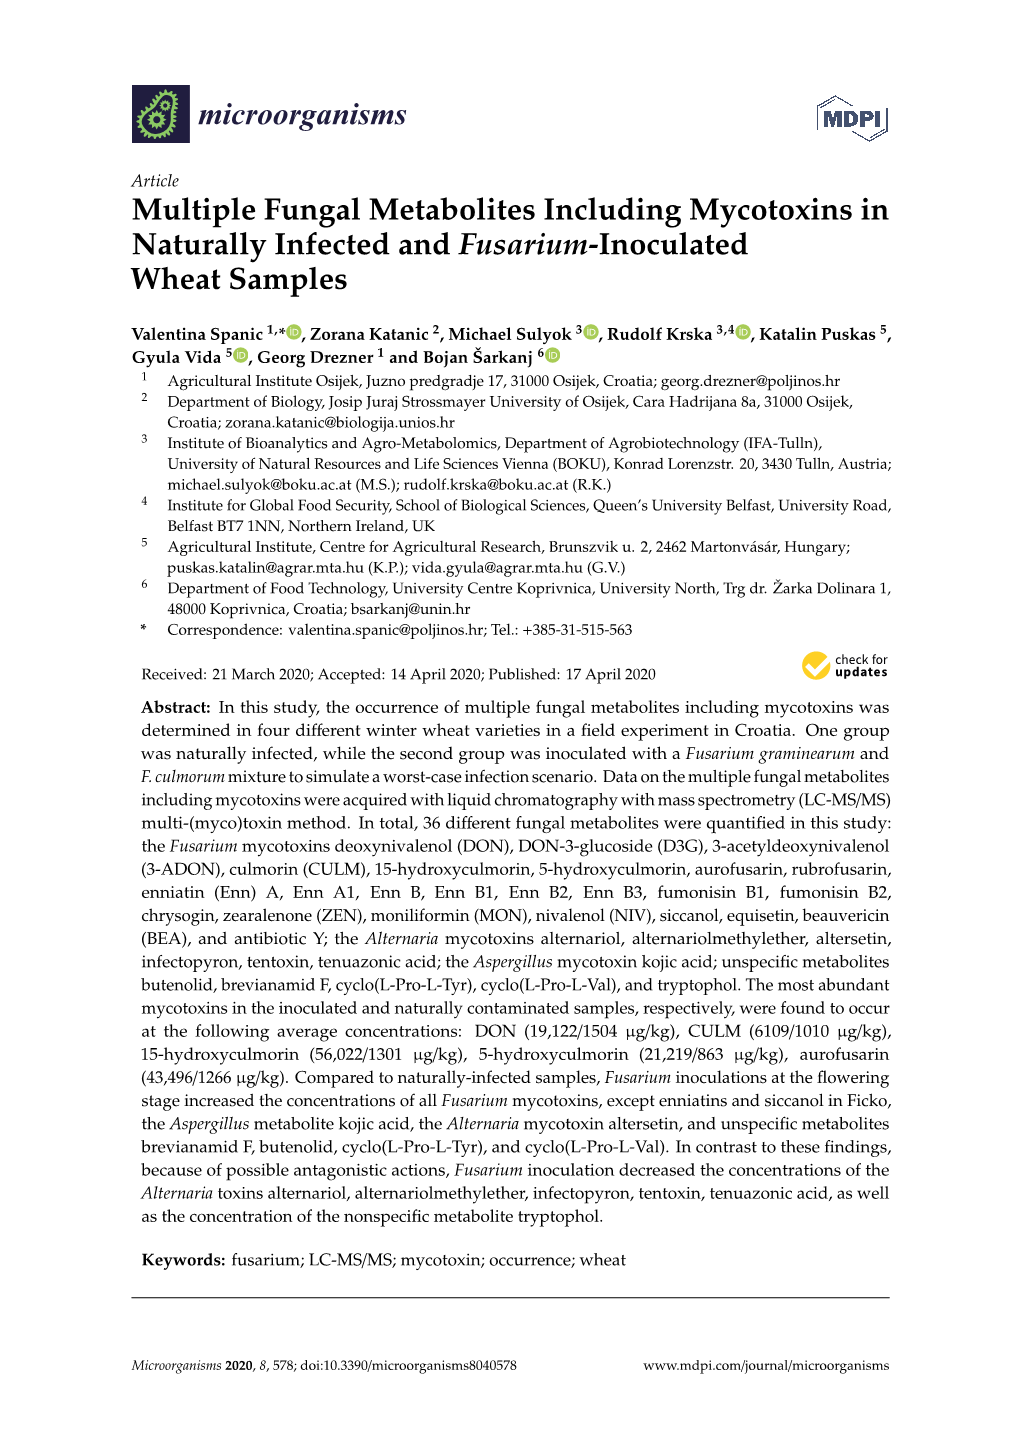 Multiple Fungal Metabolites Including Mycotoxins in Naturally Infected and Fusarium-Inoculated Wheat Samples